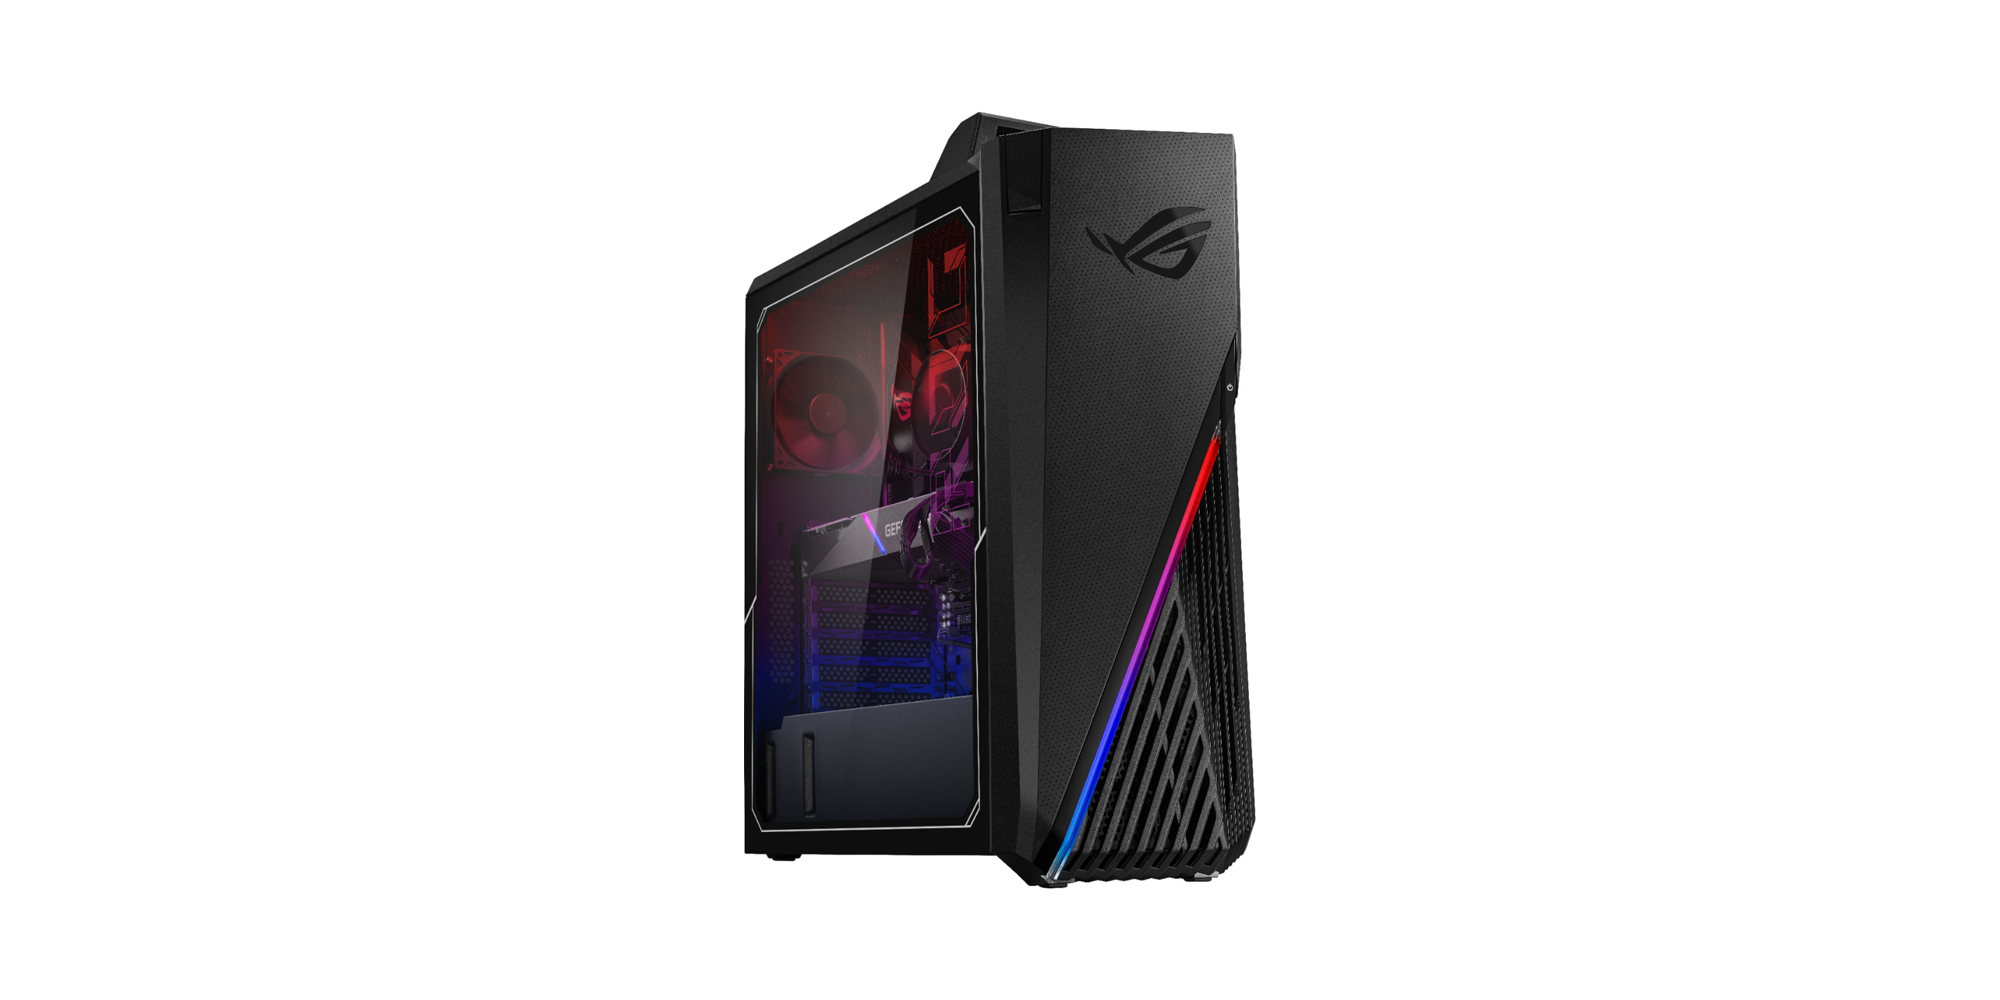 This ASUS RTX 3080 gaming desktop with an Intel i7 processor 